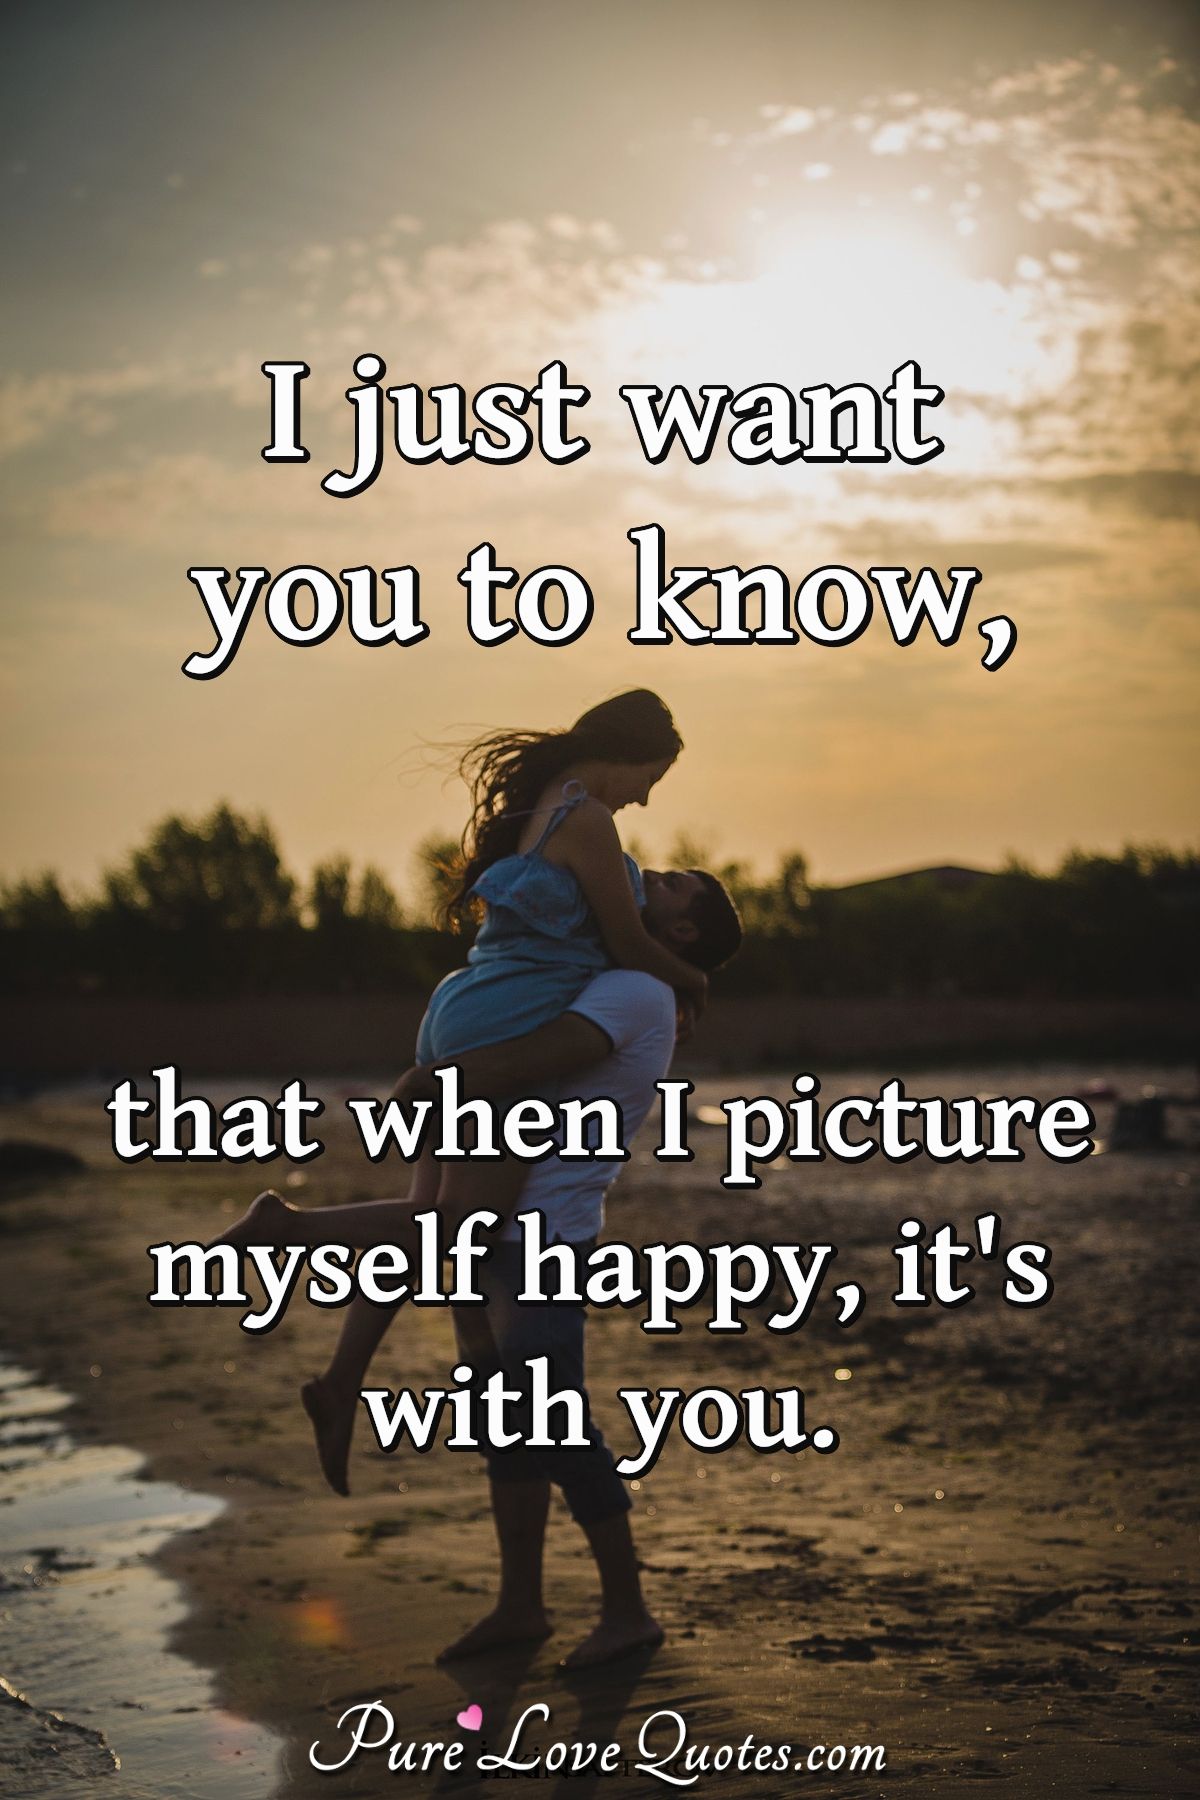 I just want you to know, that when I picture myself happy, it's with you. - Anonymous